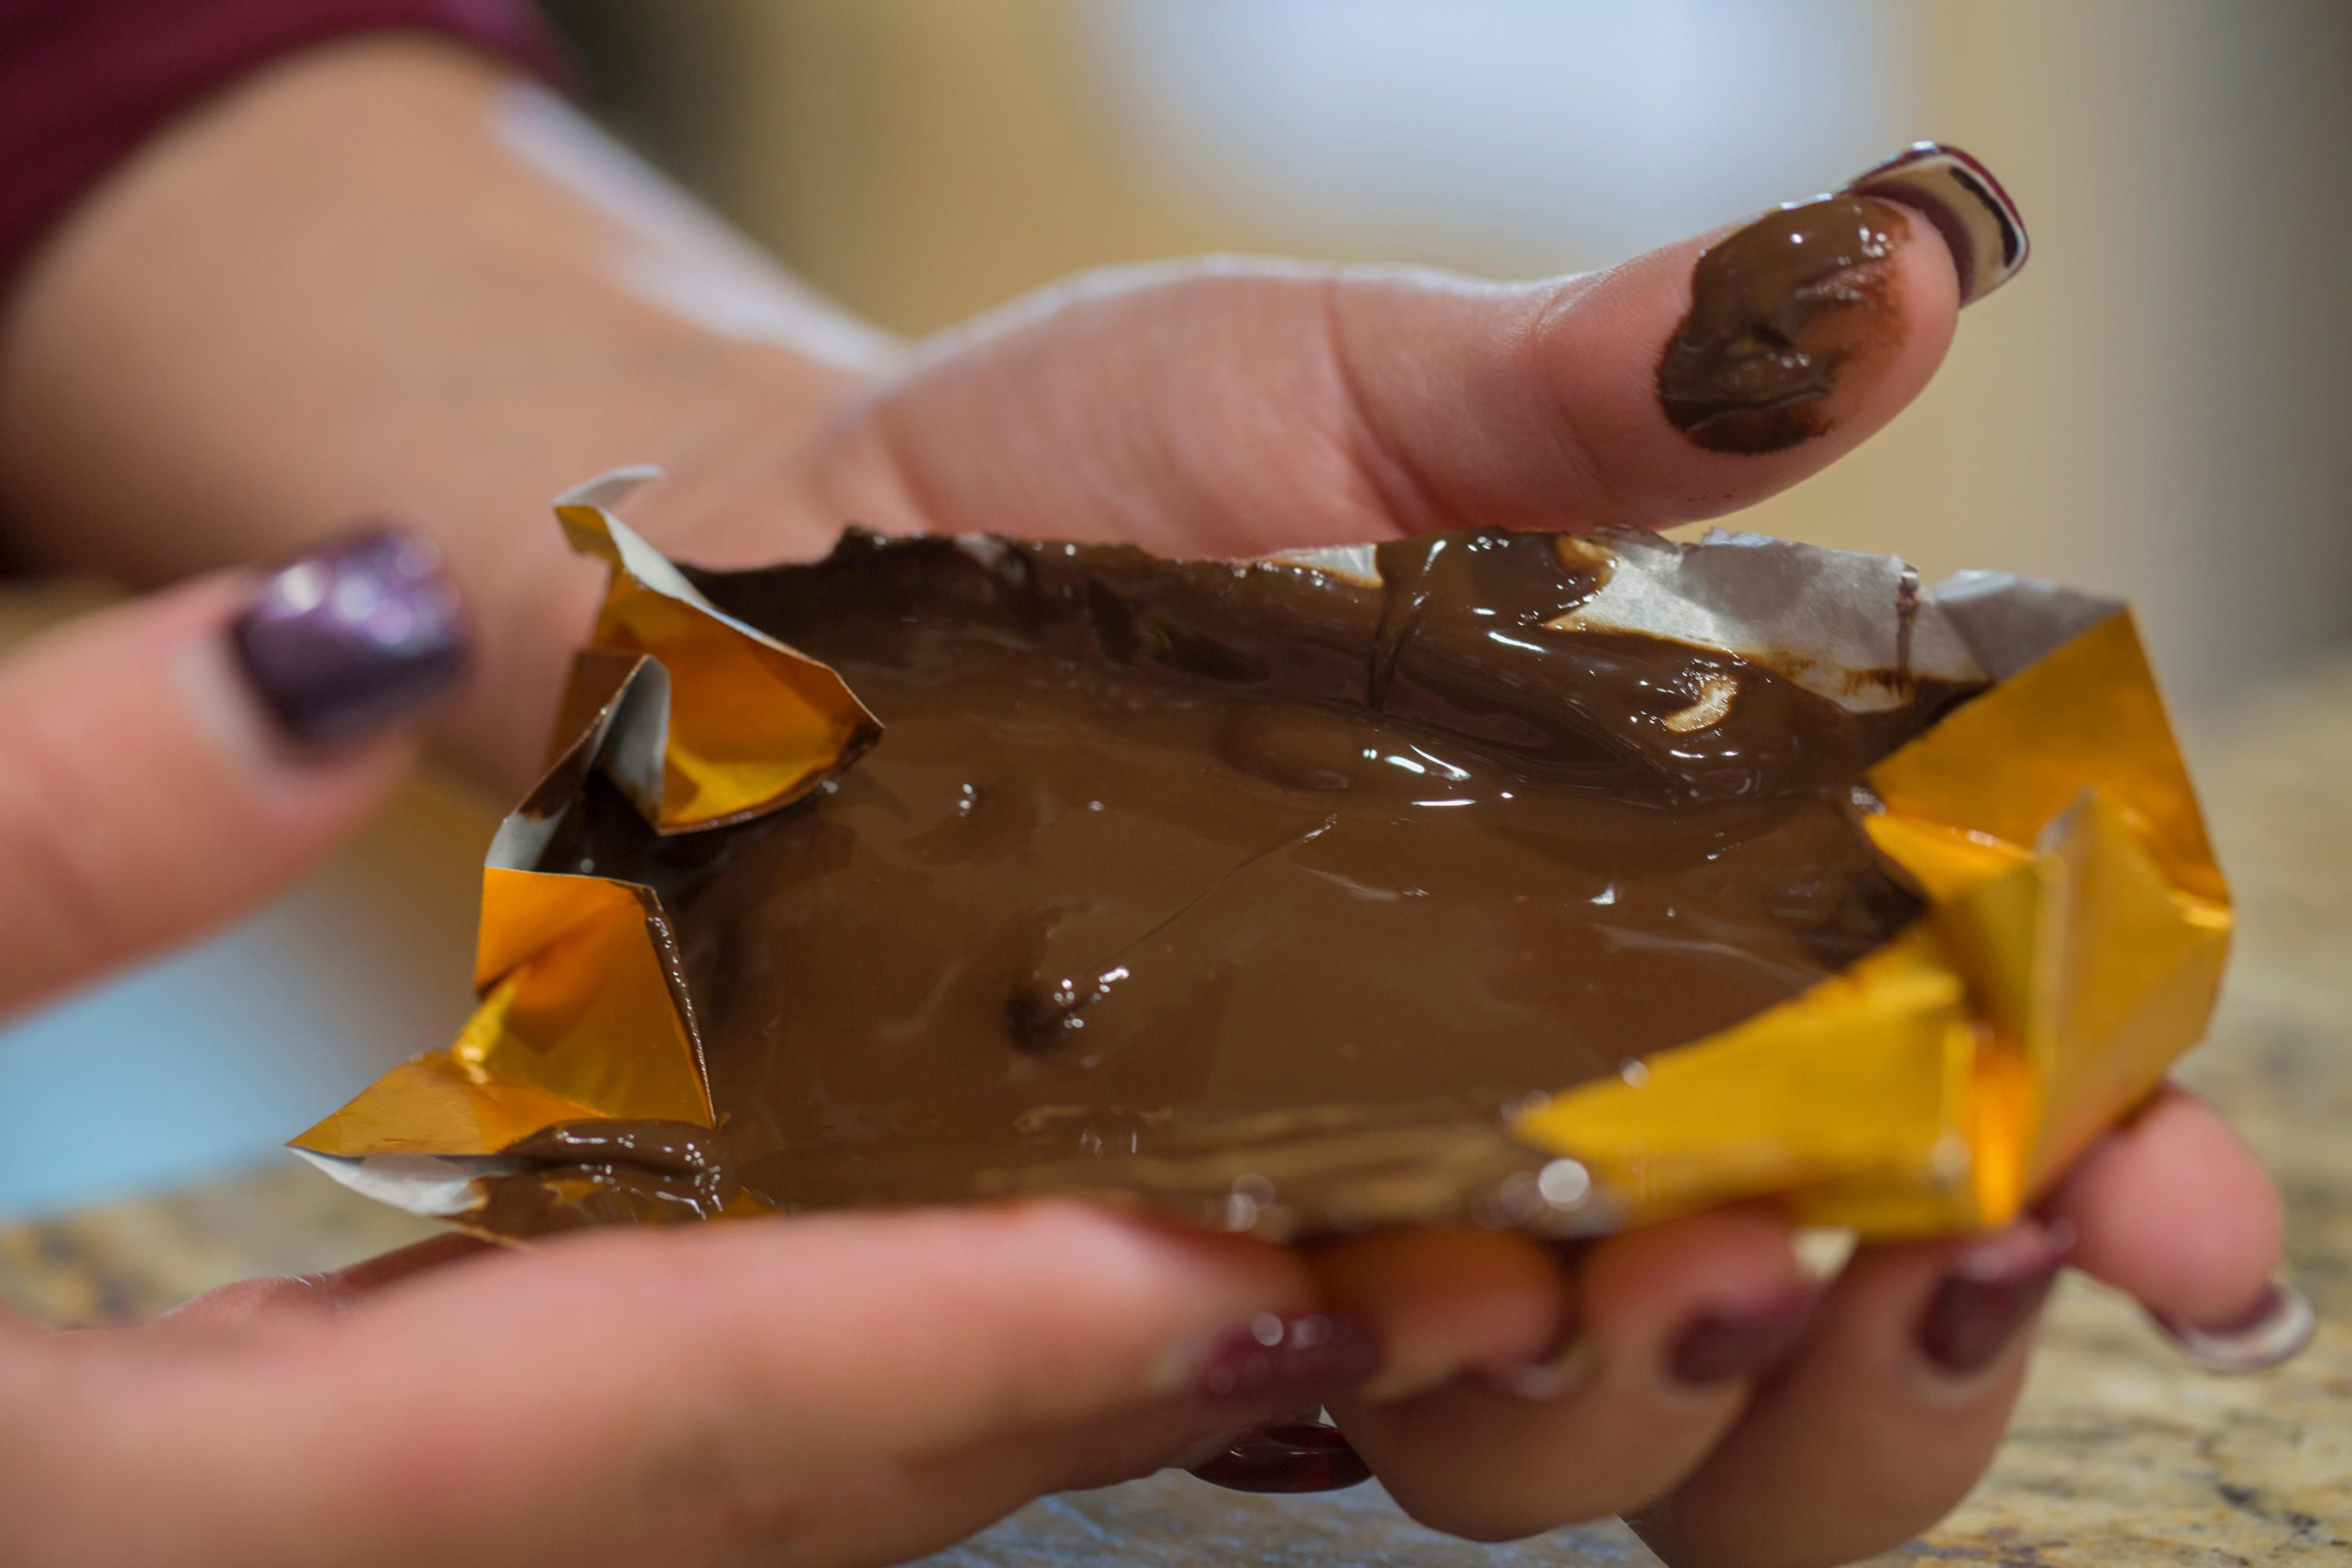 Woman unwrapping melted chocolate bar